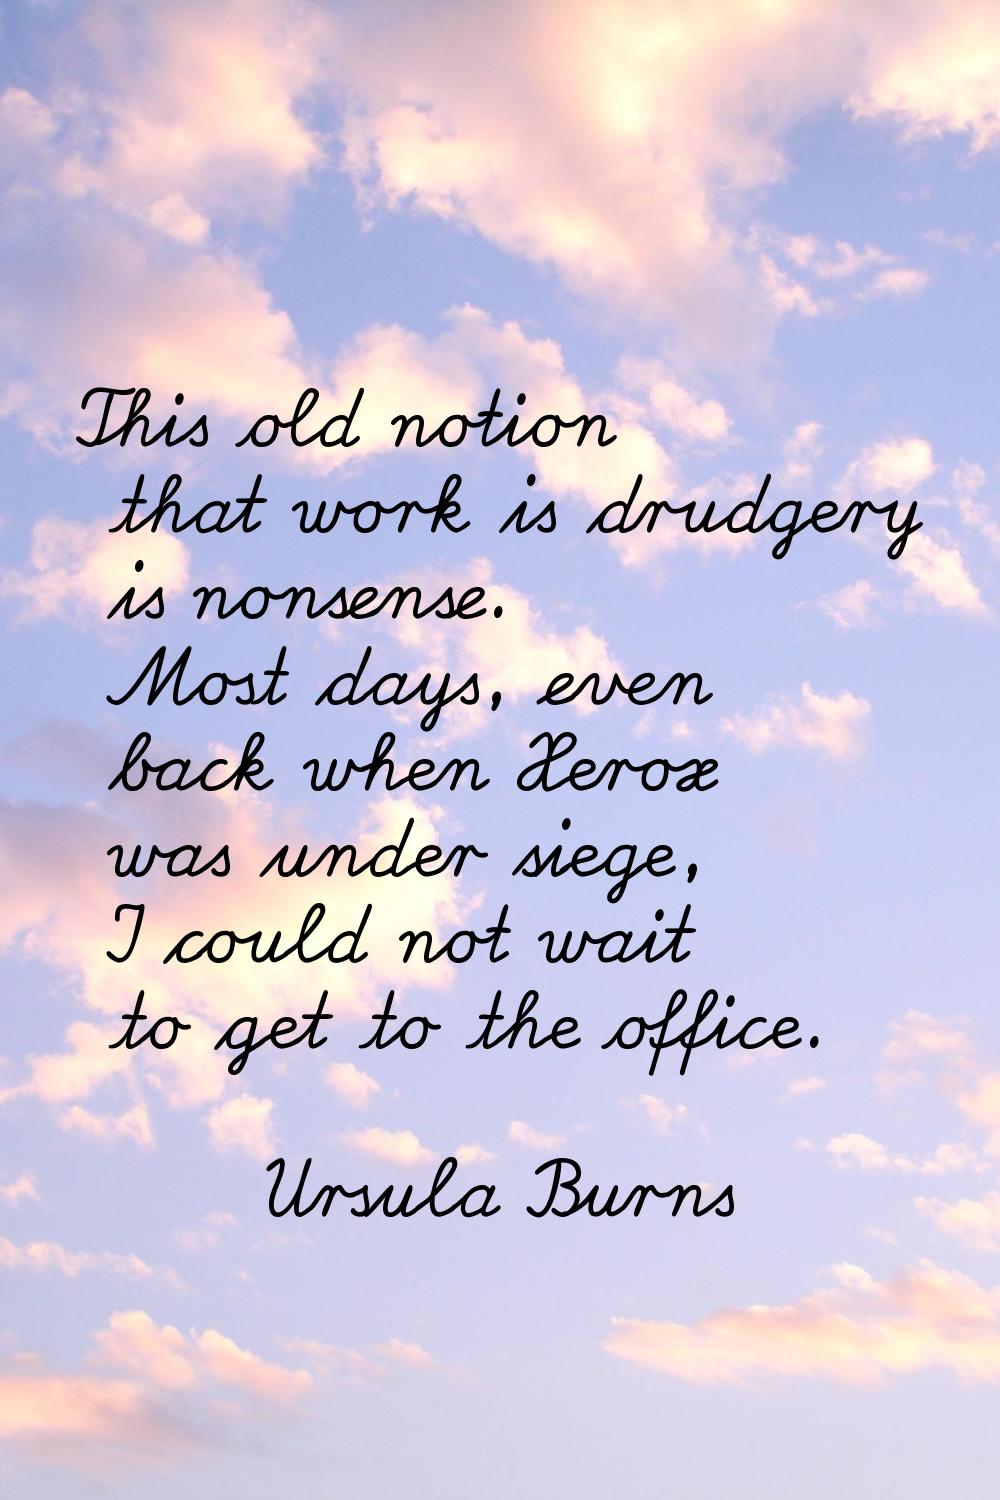 This old notion that work is drudgery is nonsense. Most days, even back when Xerox was under siege,